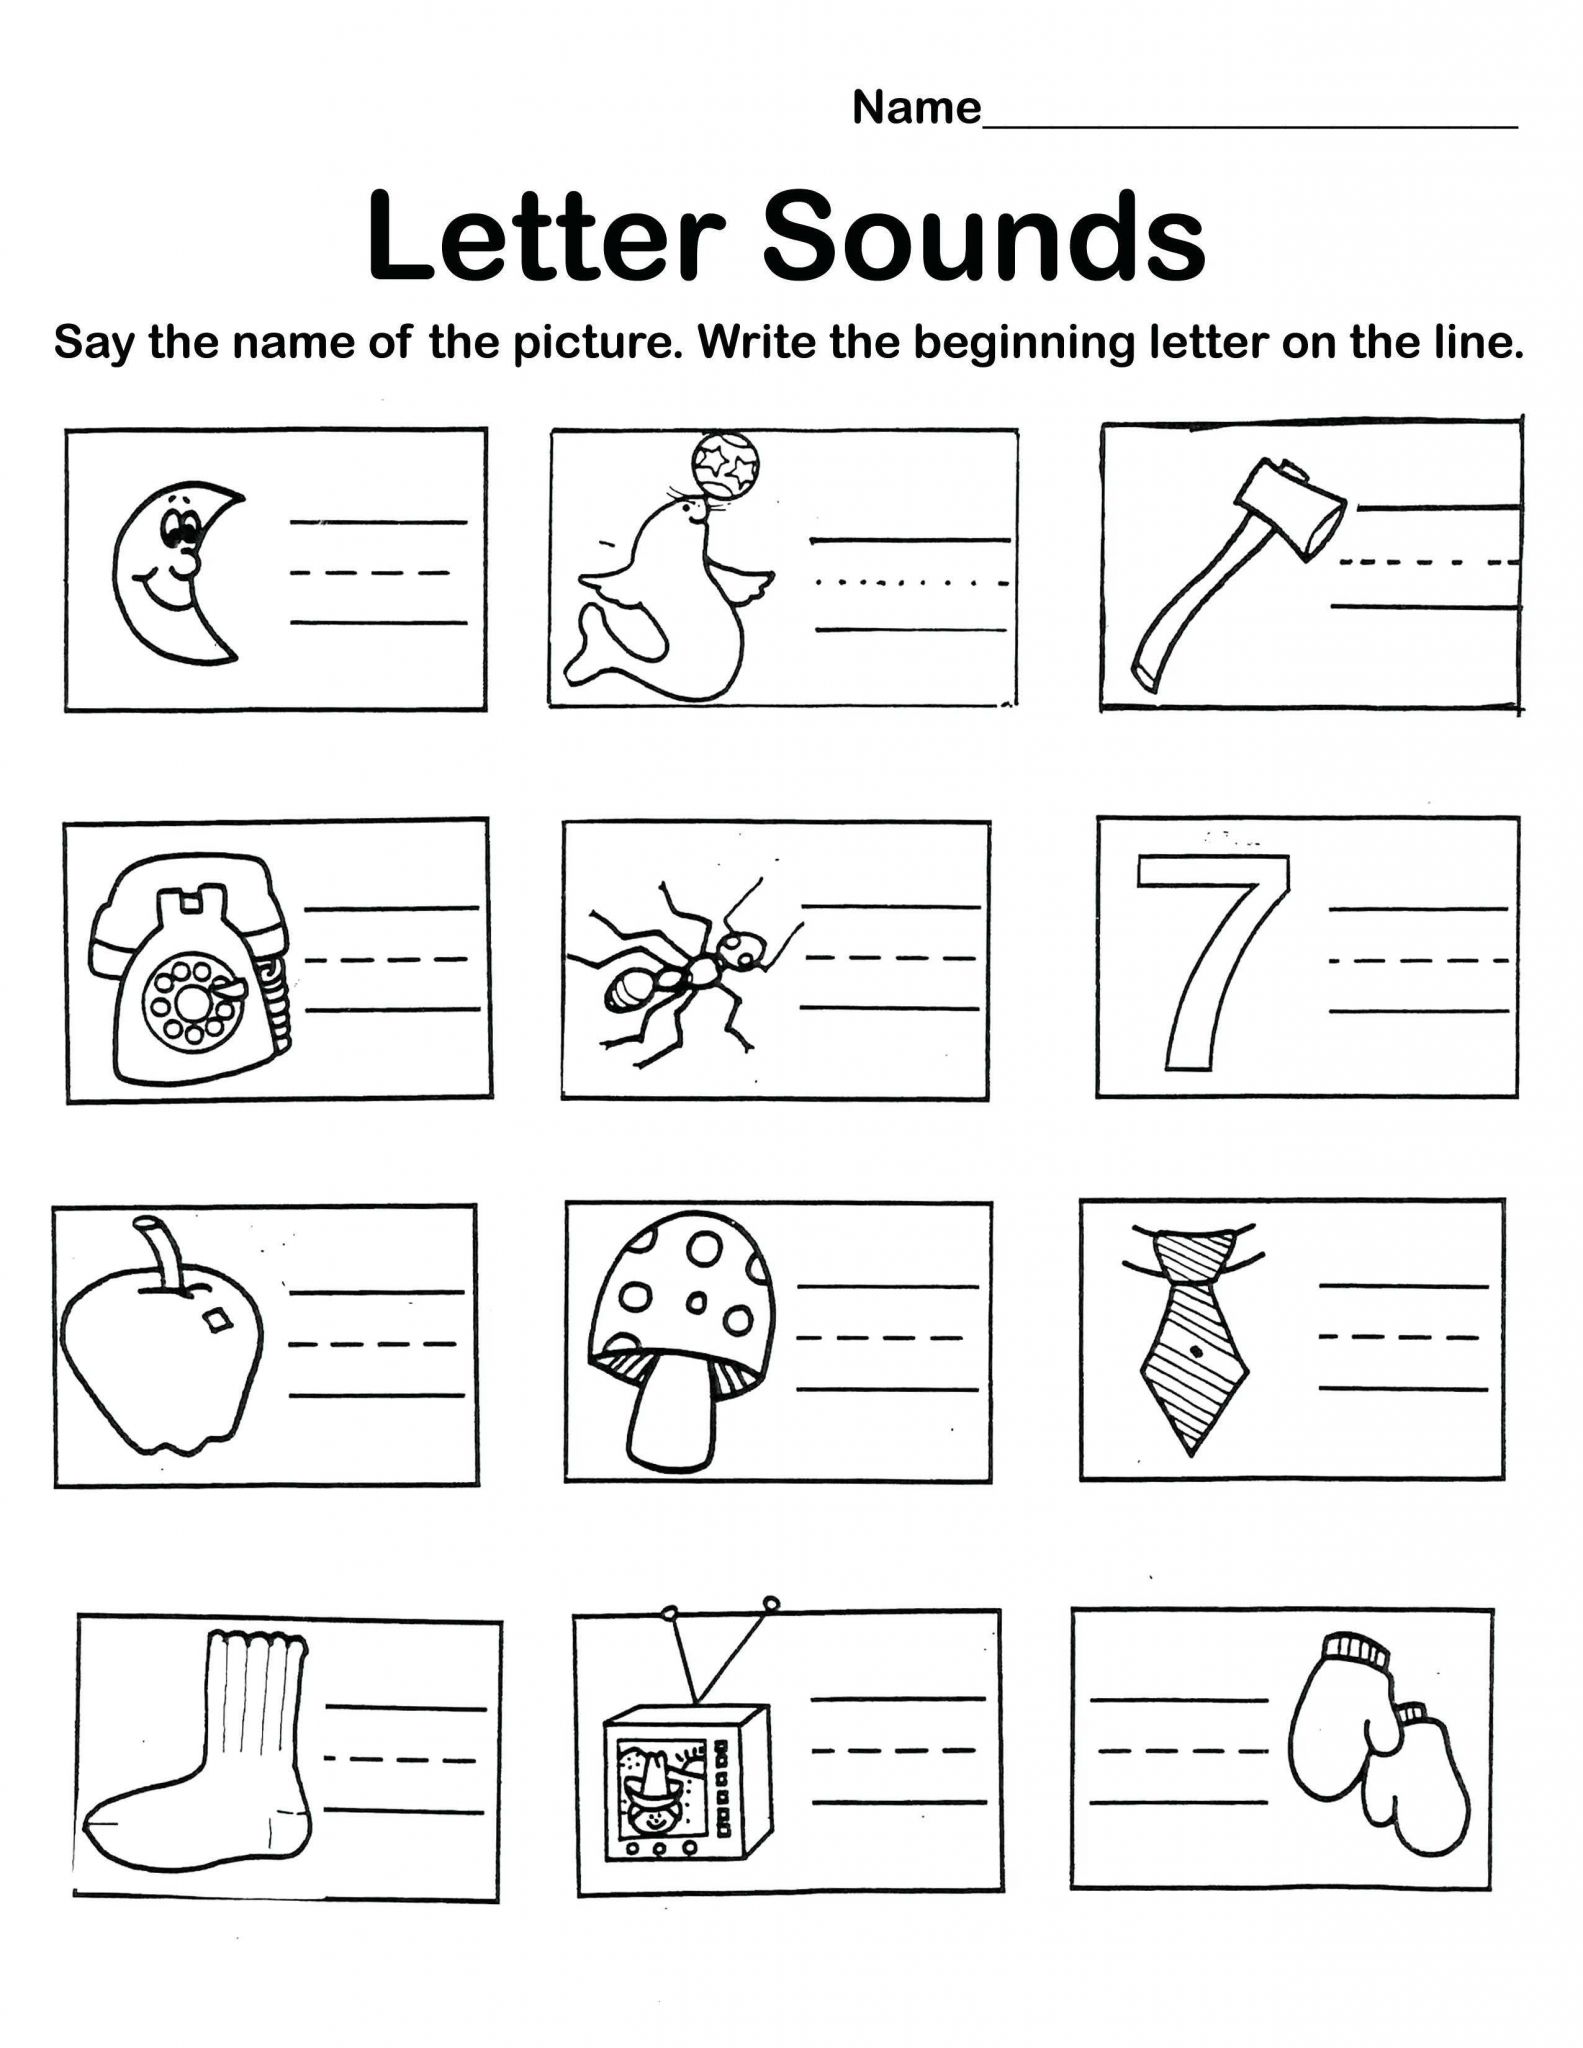 Matrices Worksheet with Answers Along with Letter sound Worksheets for Pre K Gallery Worksheet for Kids In